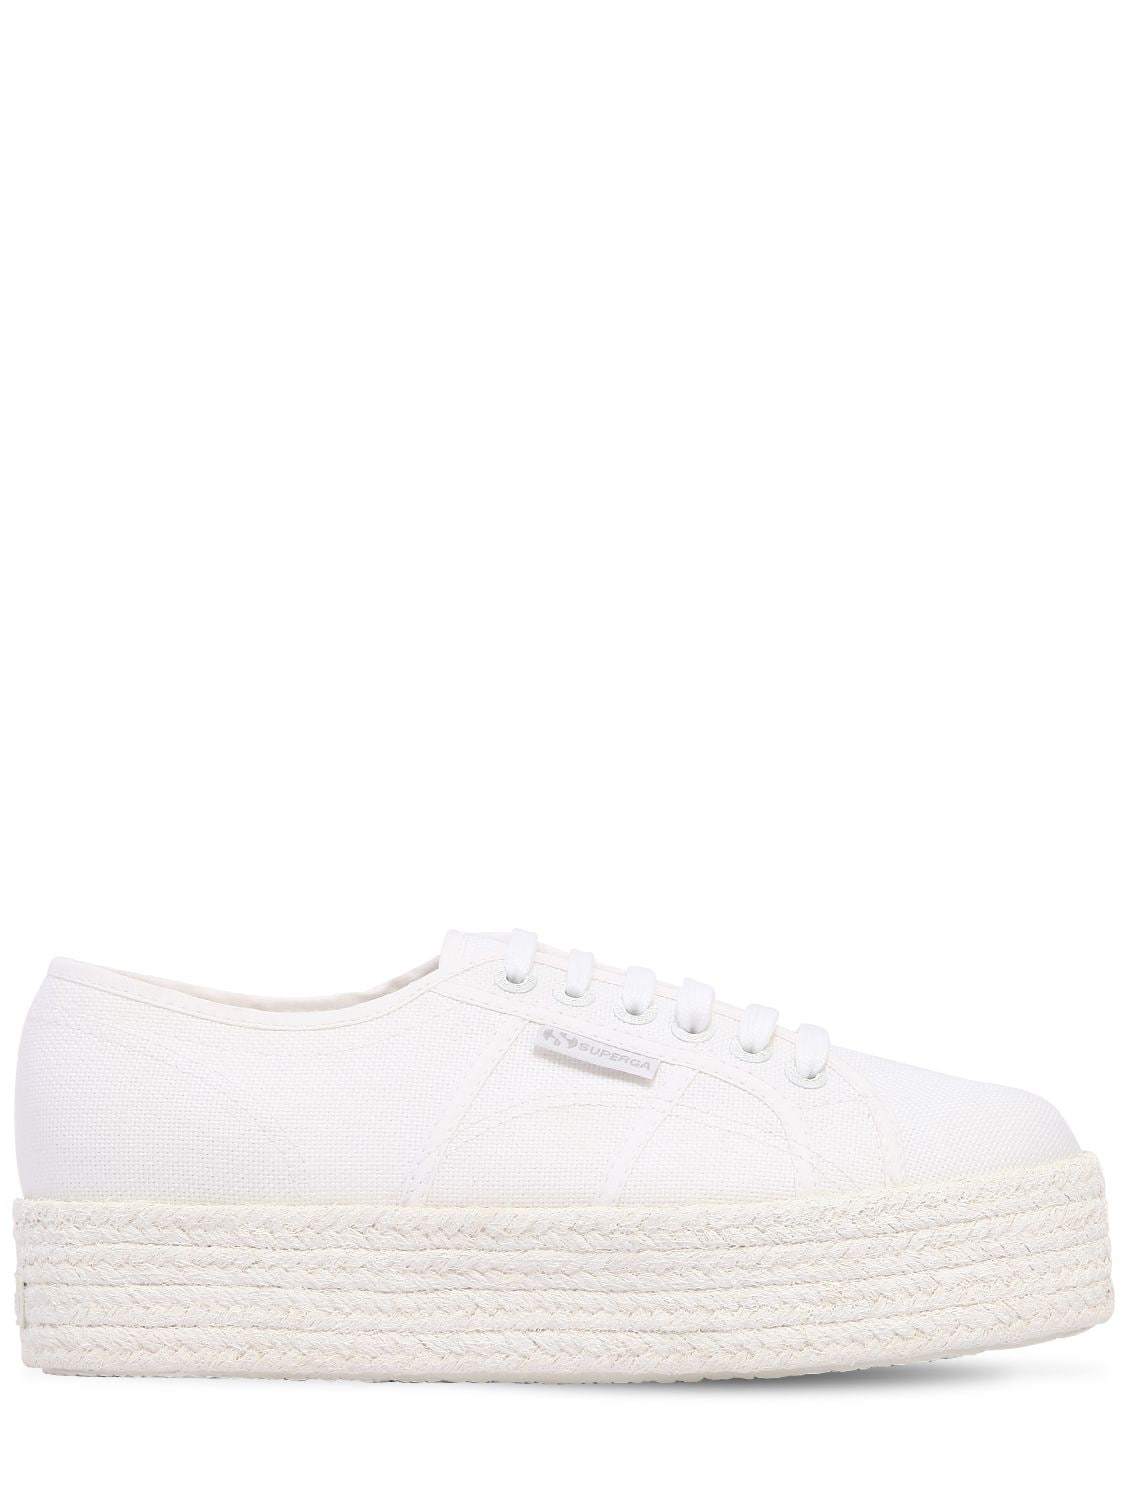 Superga 40mm Canvas Platform Sneakers In White